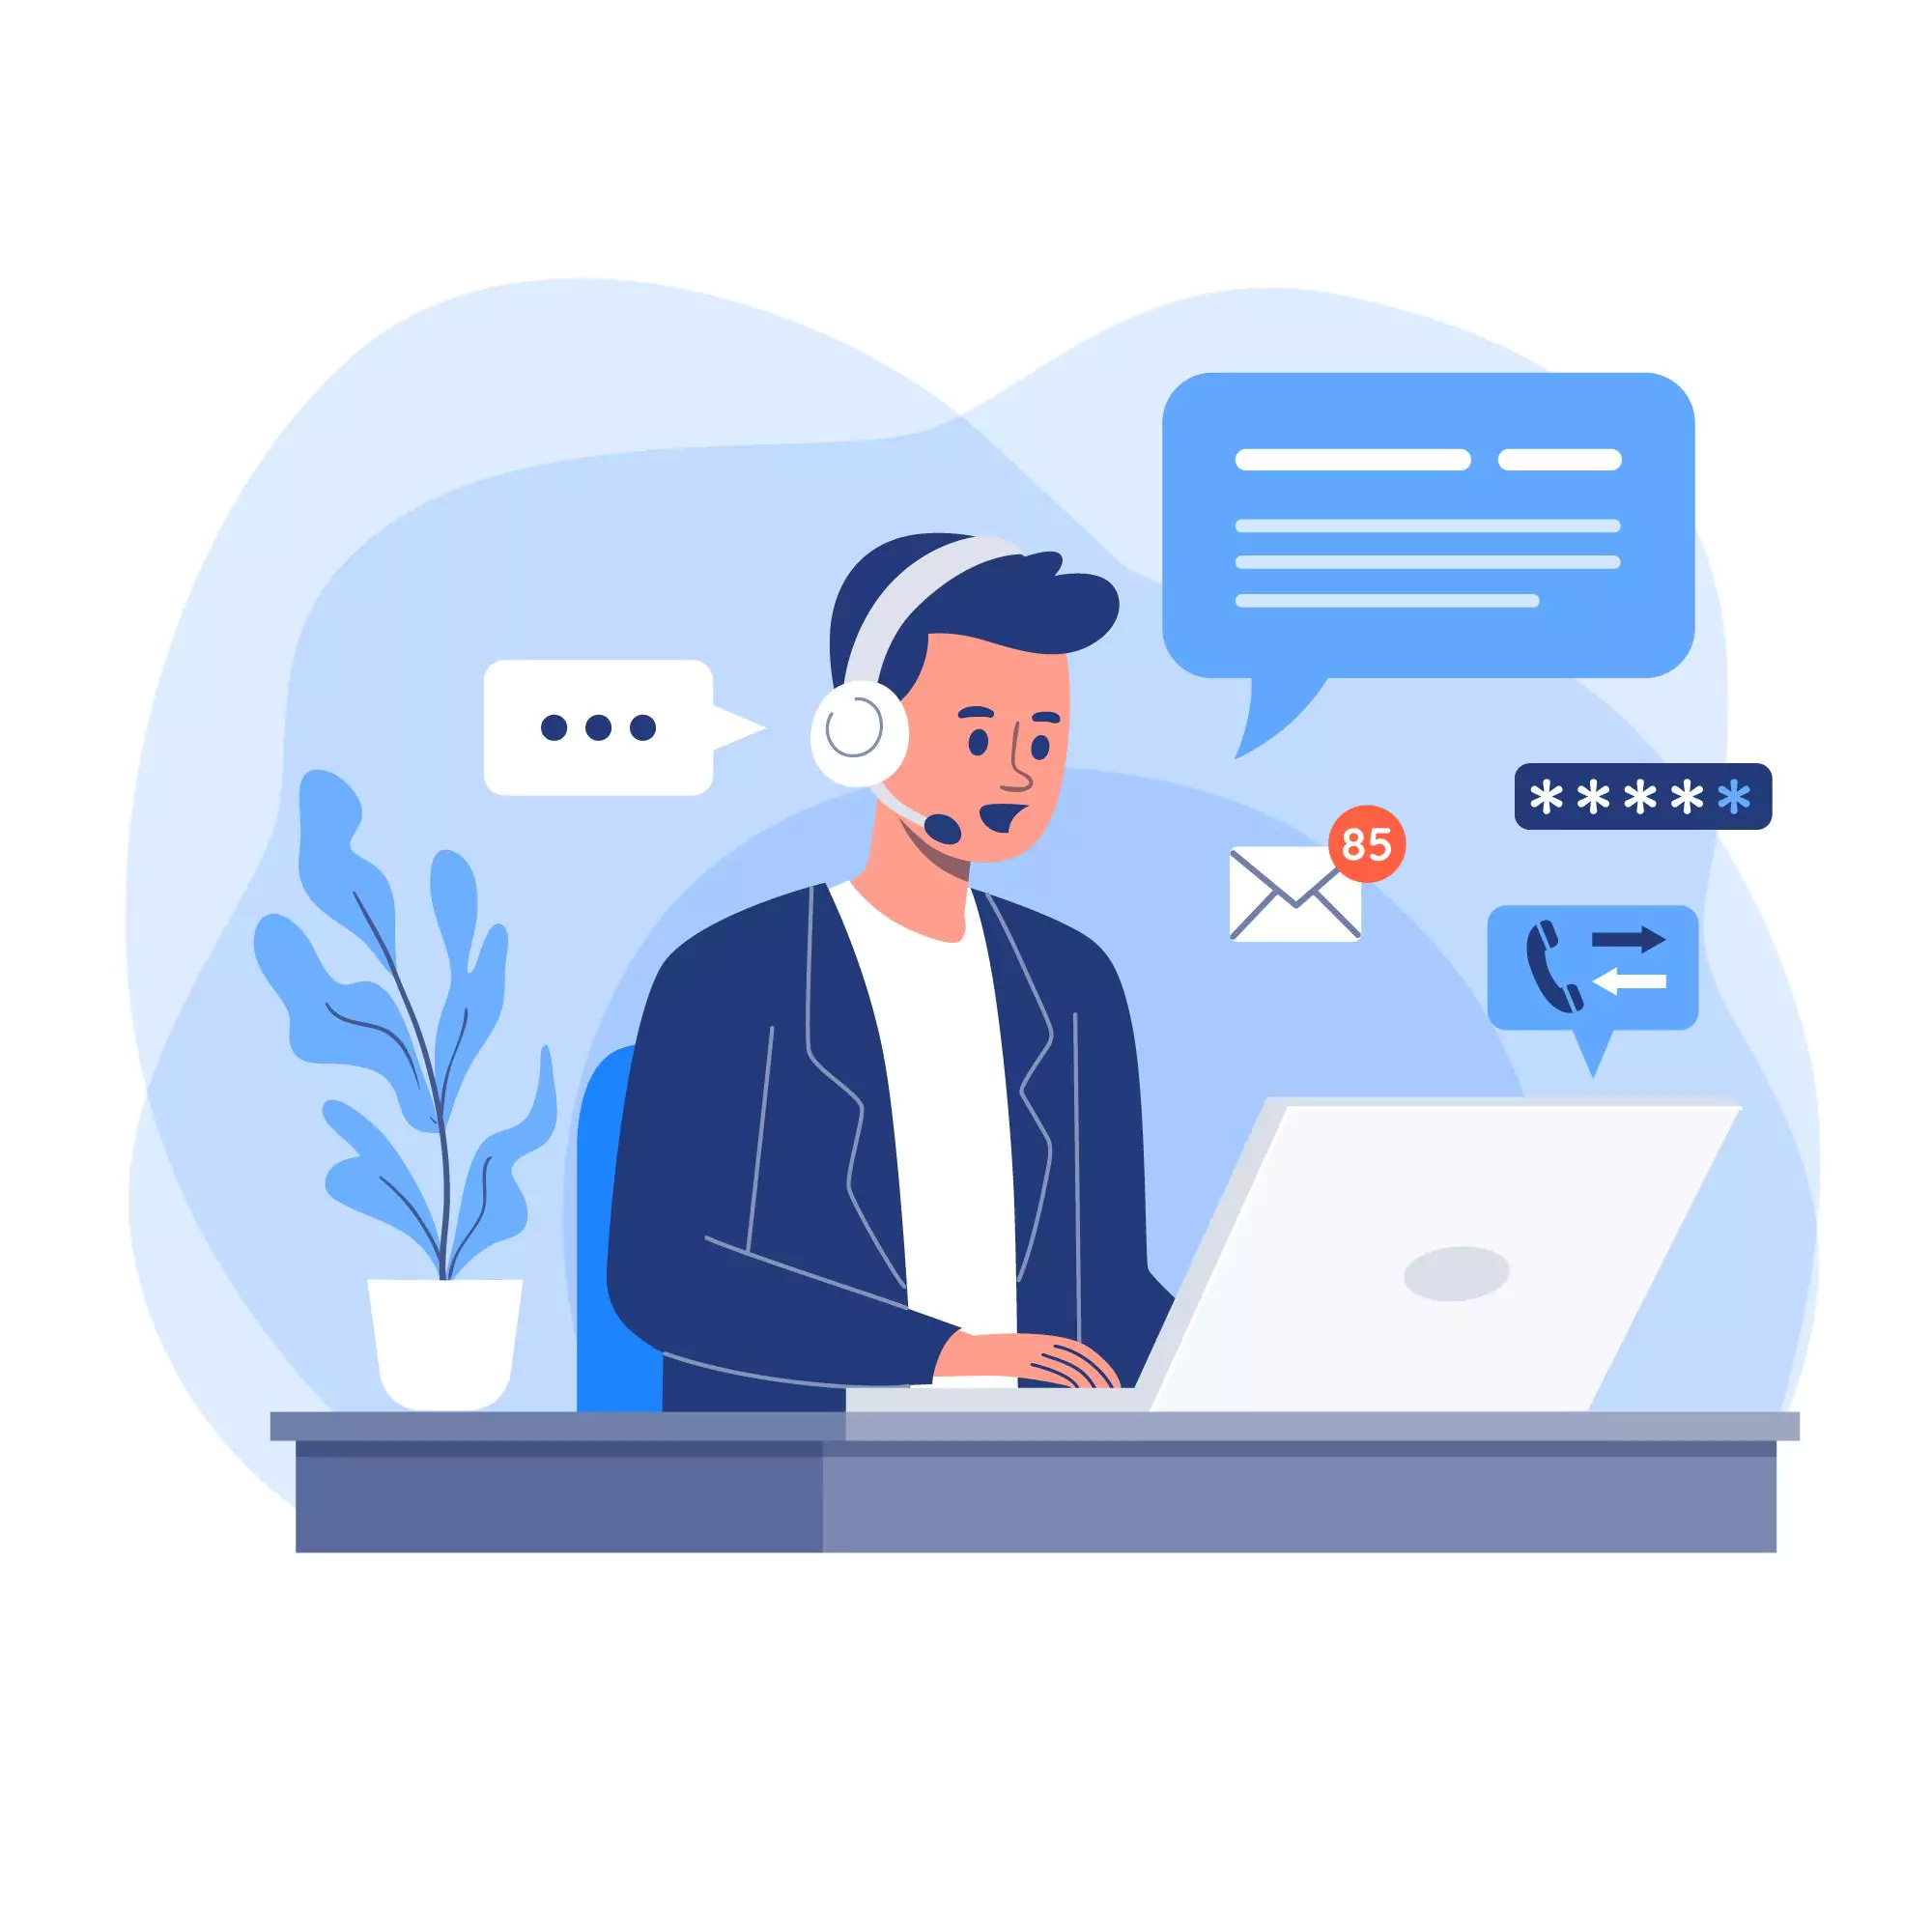 Benefits of using auto-reply in customer support